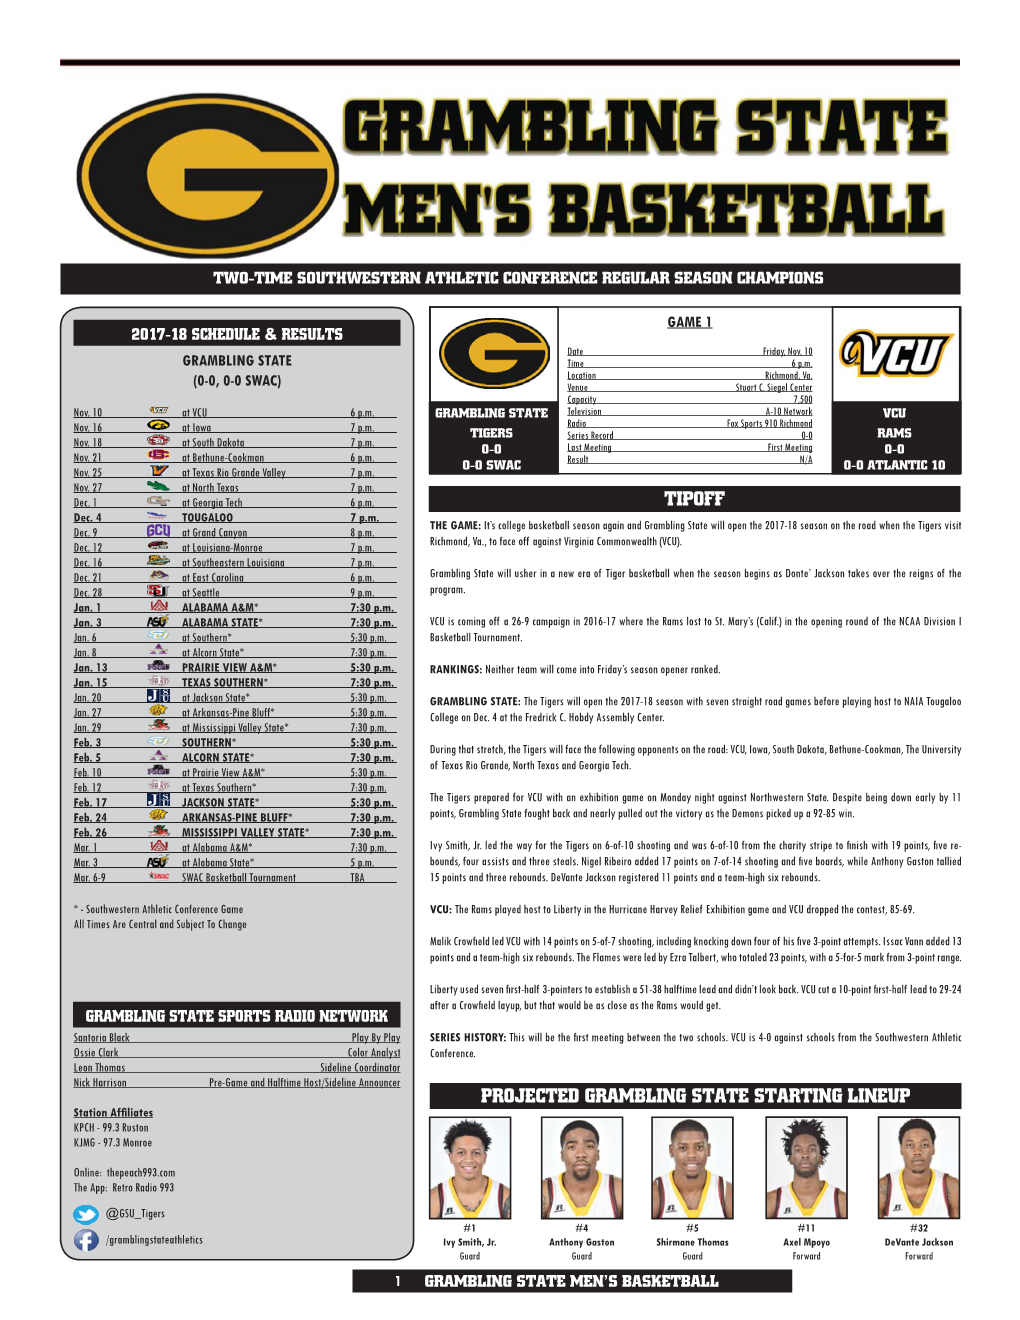 Tipoff Projected Grambling State Starting Lineup